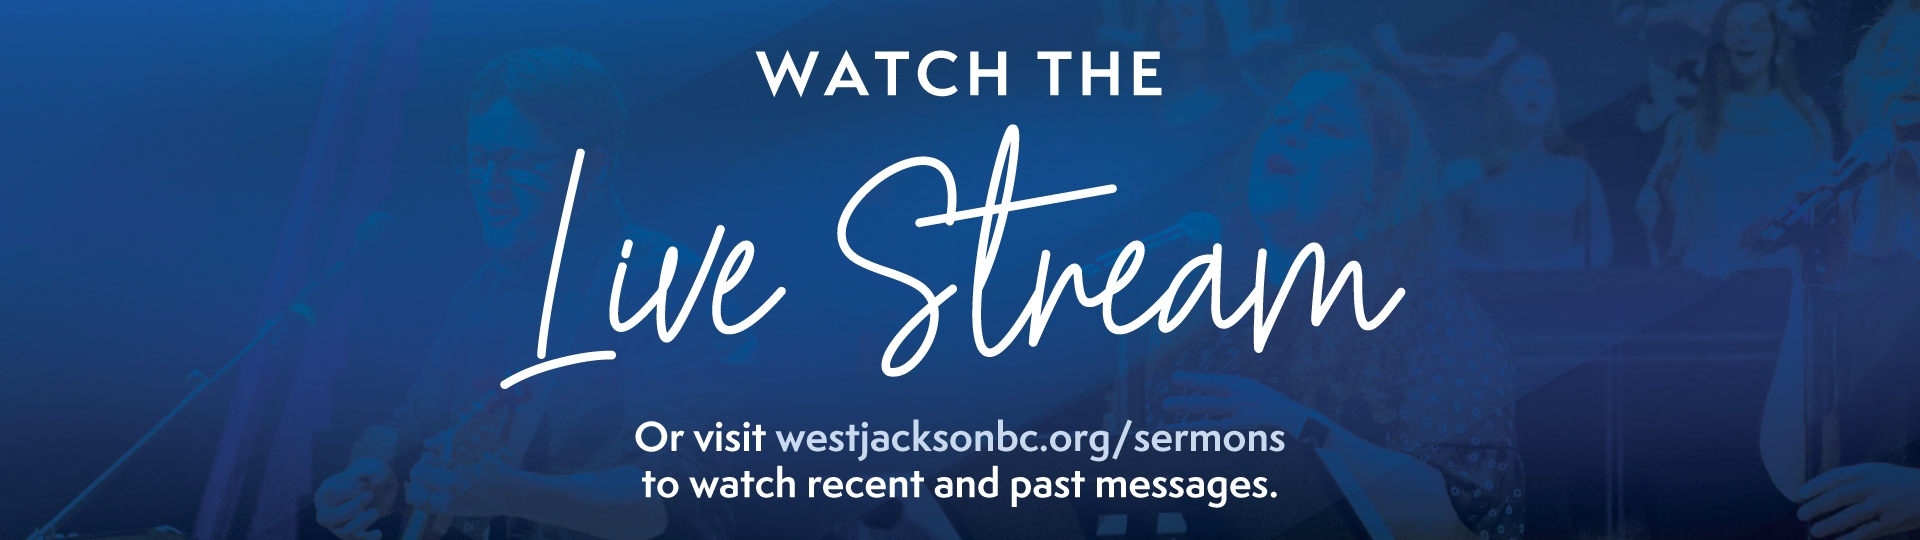 Watch the Live Stream. Or visit westjacksonbc.org/sermons to watch recent and past messages.